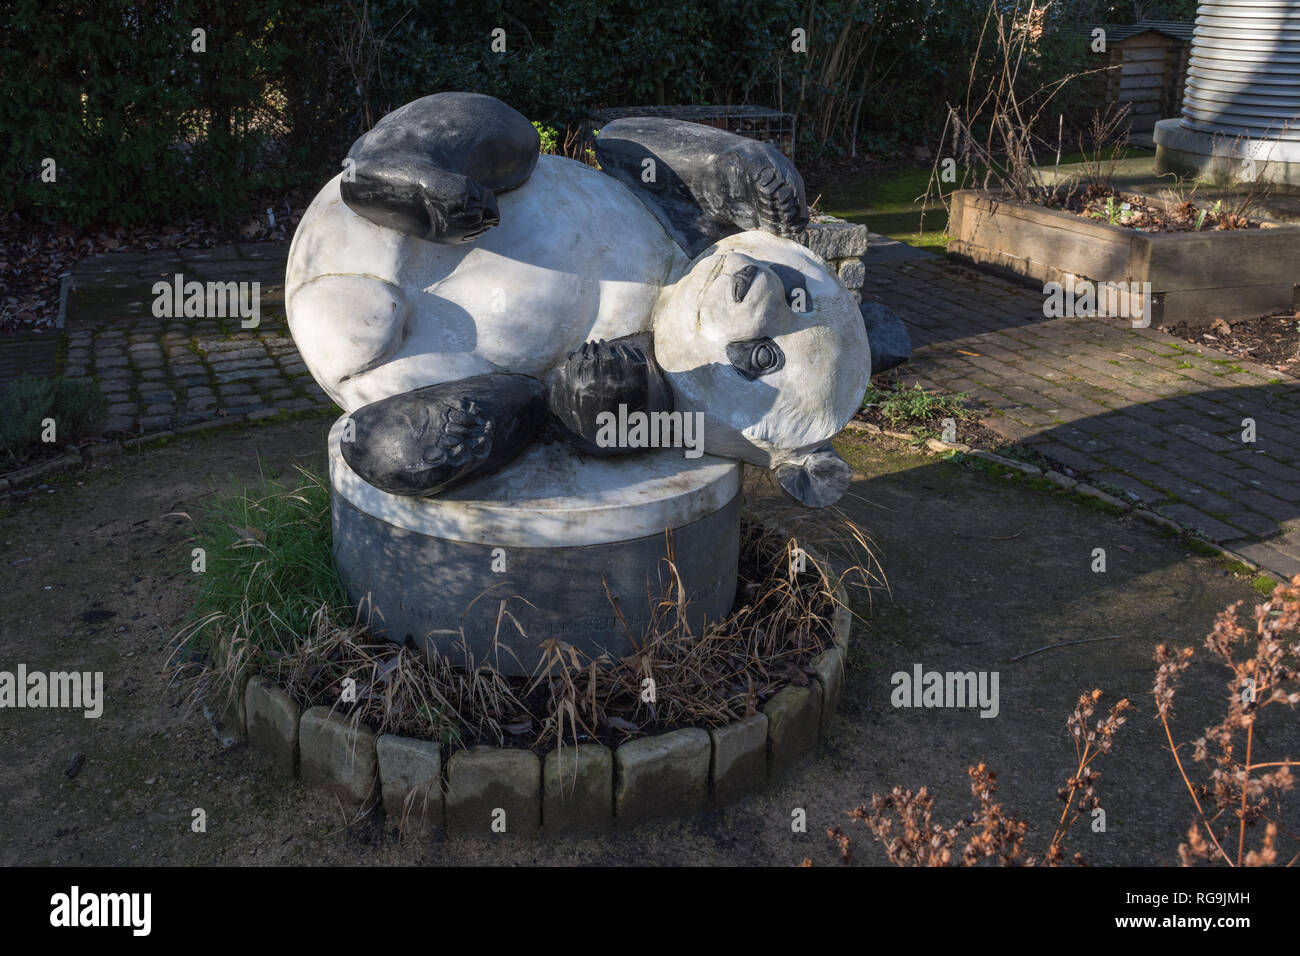 The Living Planet Centre, headquarters of the World Wildlife Fund (WWF) in Woking, Surrey, UK. Giant panda model, the WWF logo, in the garden outside. Stock Photo